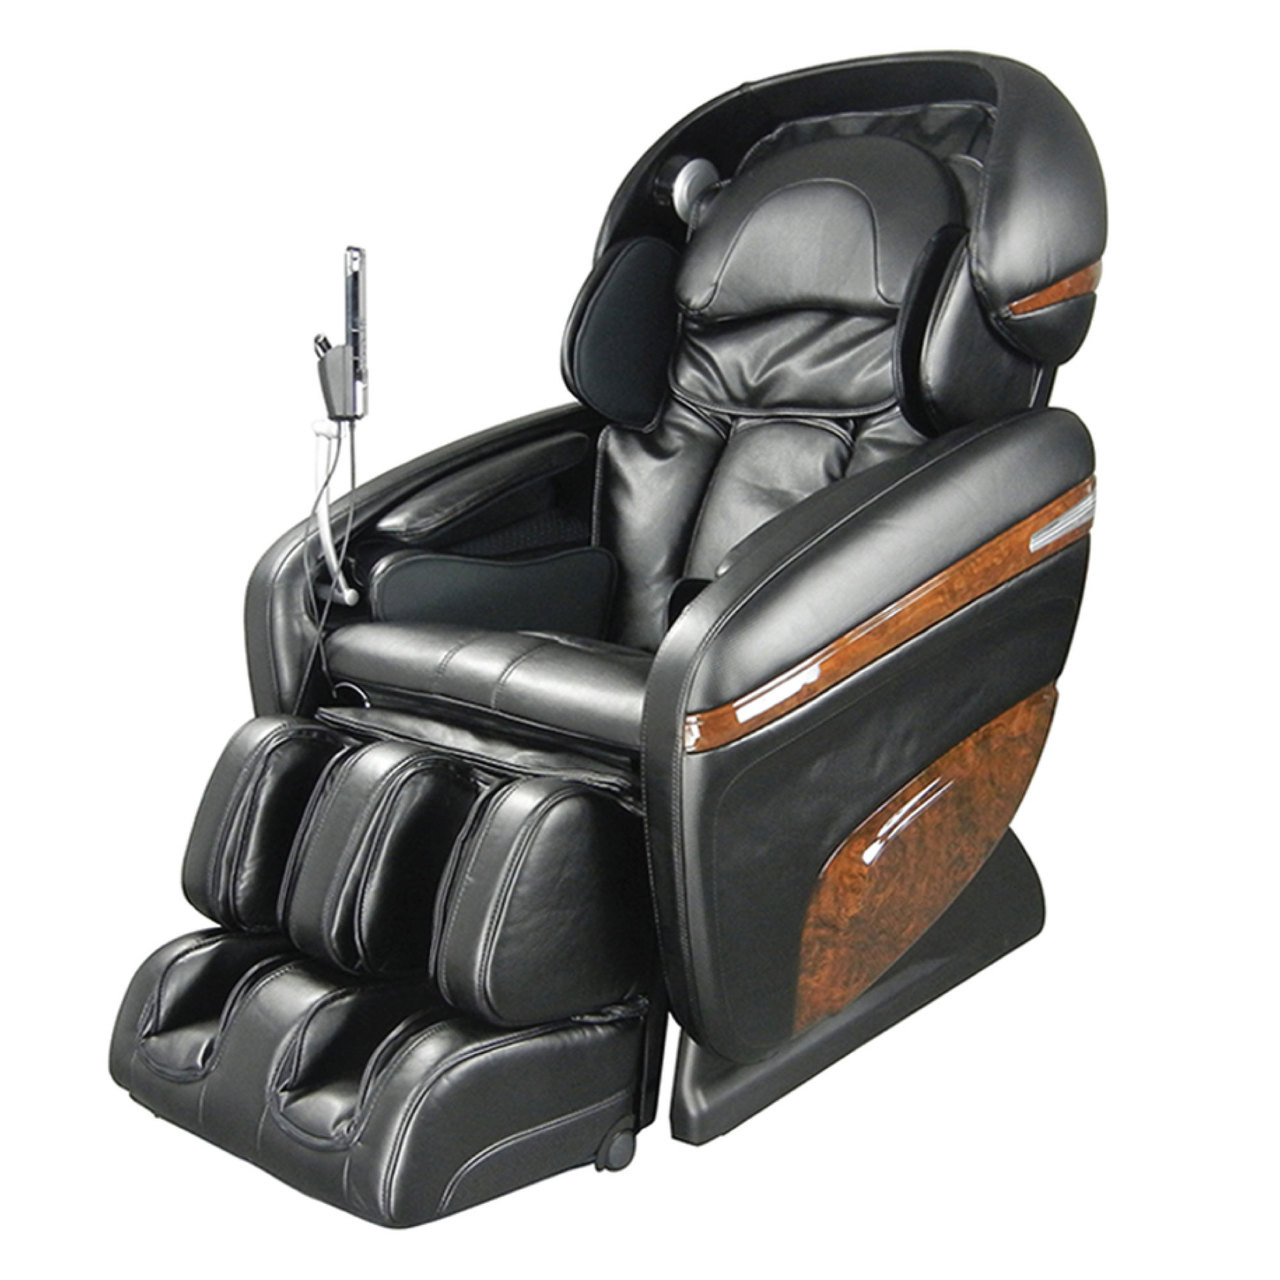 Product Review 2020 Osaki Os 3d Pro Cyber Massage Chair